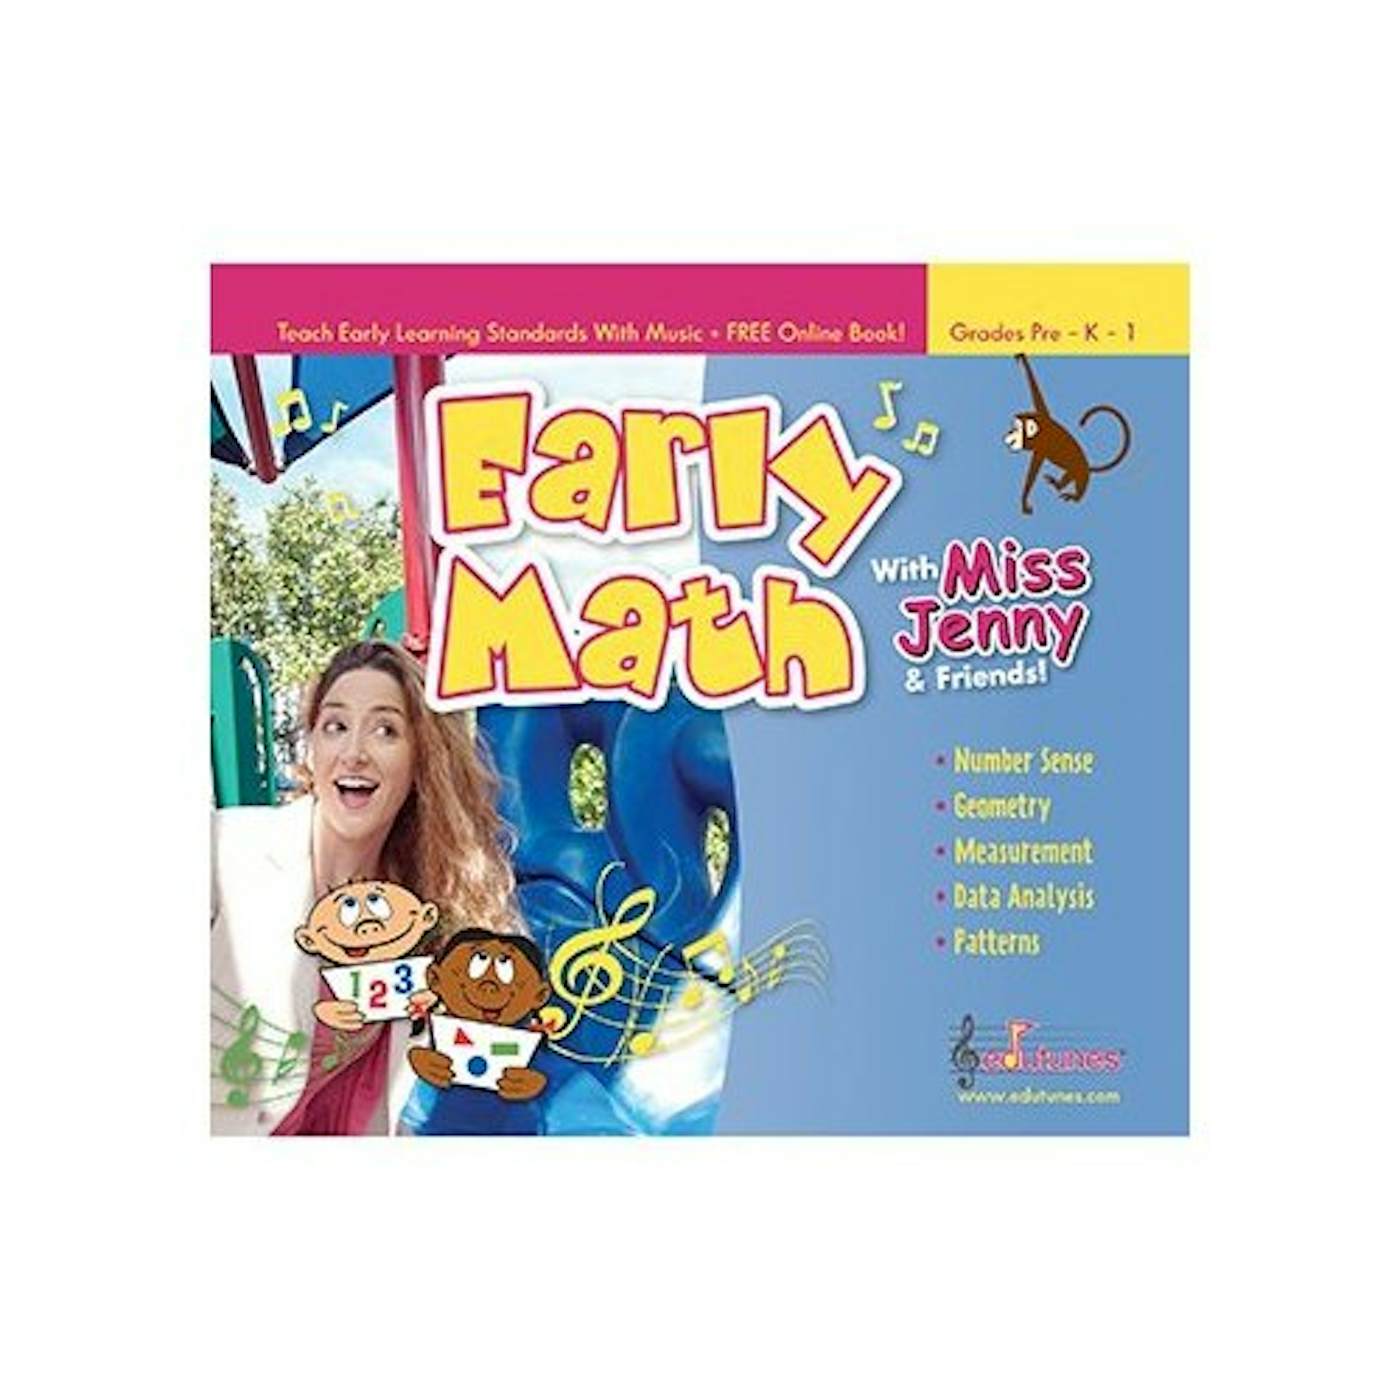 EARLY MATH WITH MISS JENNY & FRIENDS CD